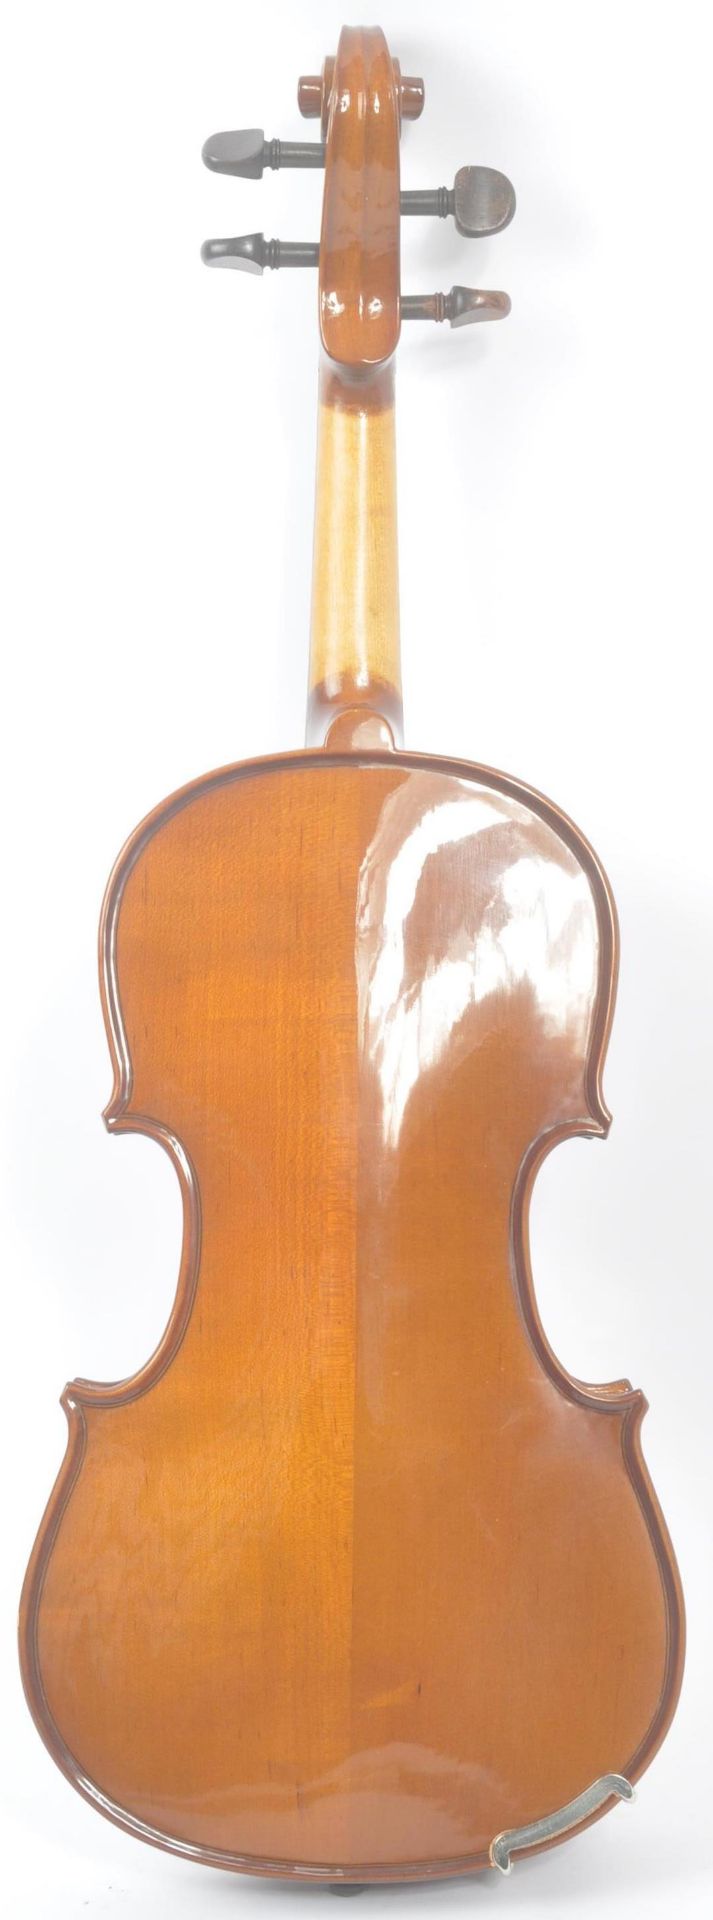 STENTOR - 20TH CENTURY 3/4 STUDENT I VIOLIN W/ BOW AND CASE - Image 4 of 7